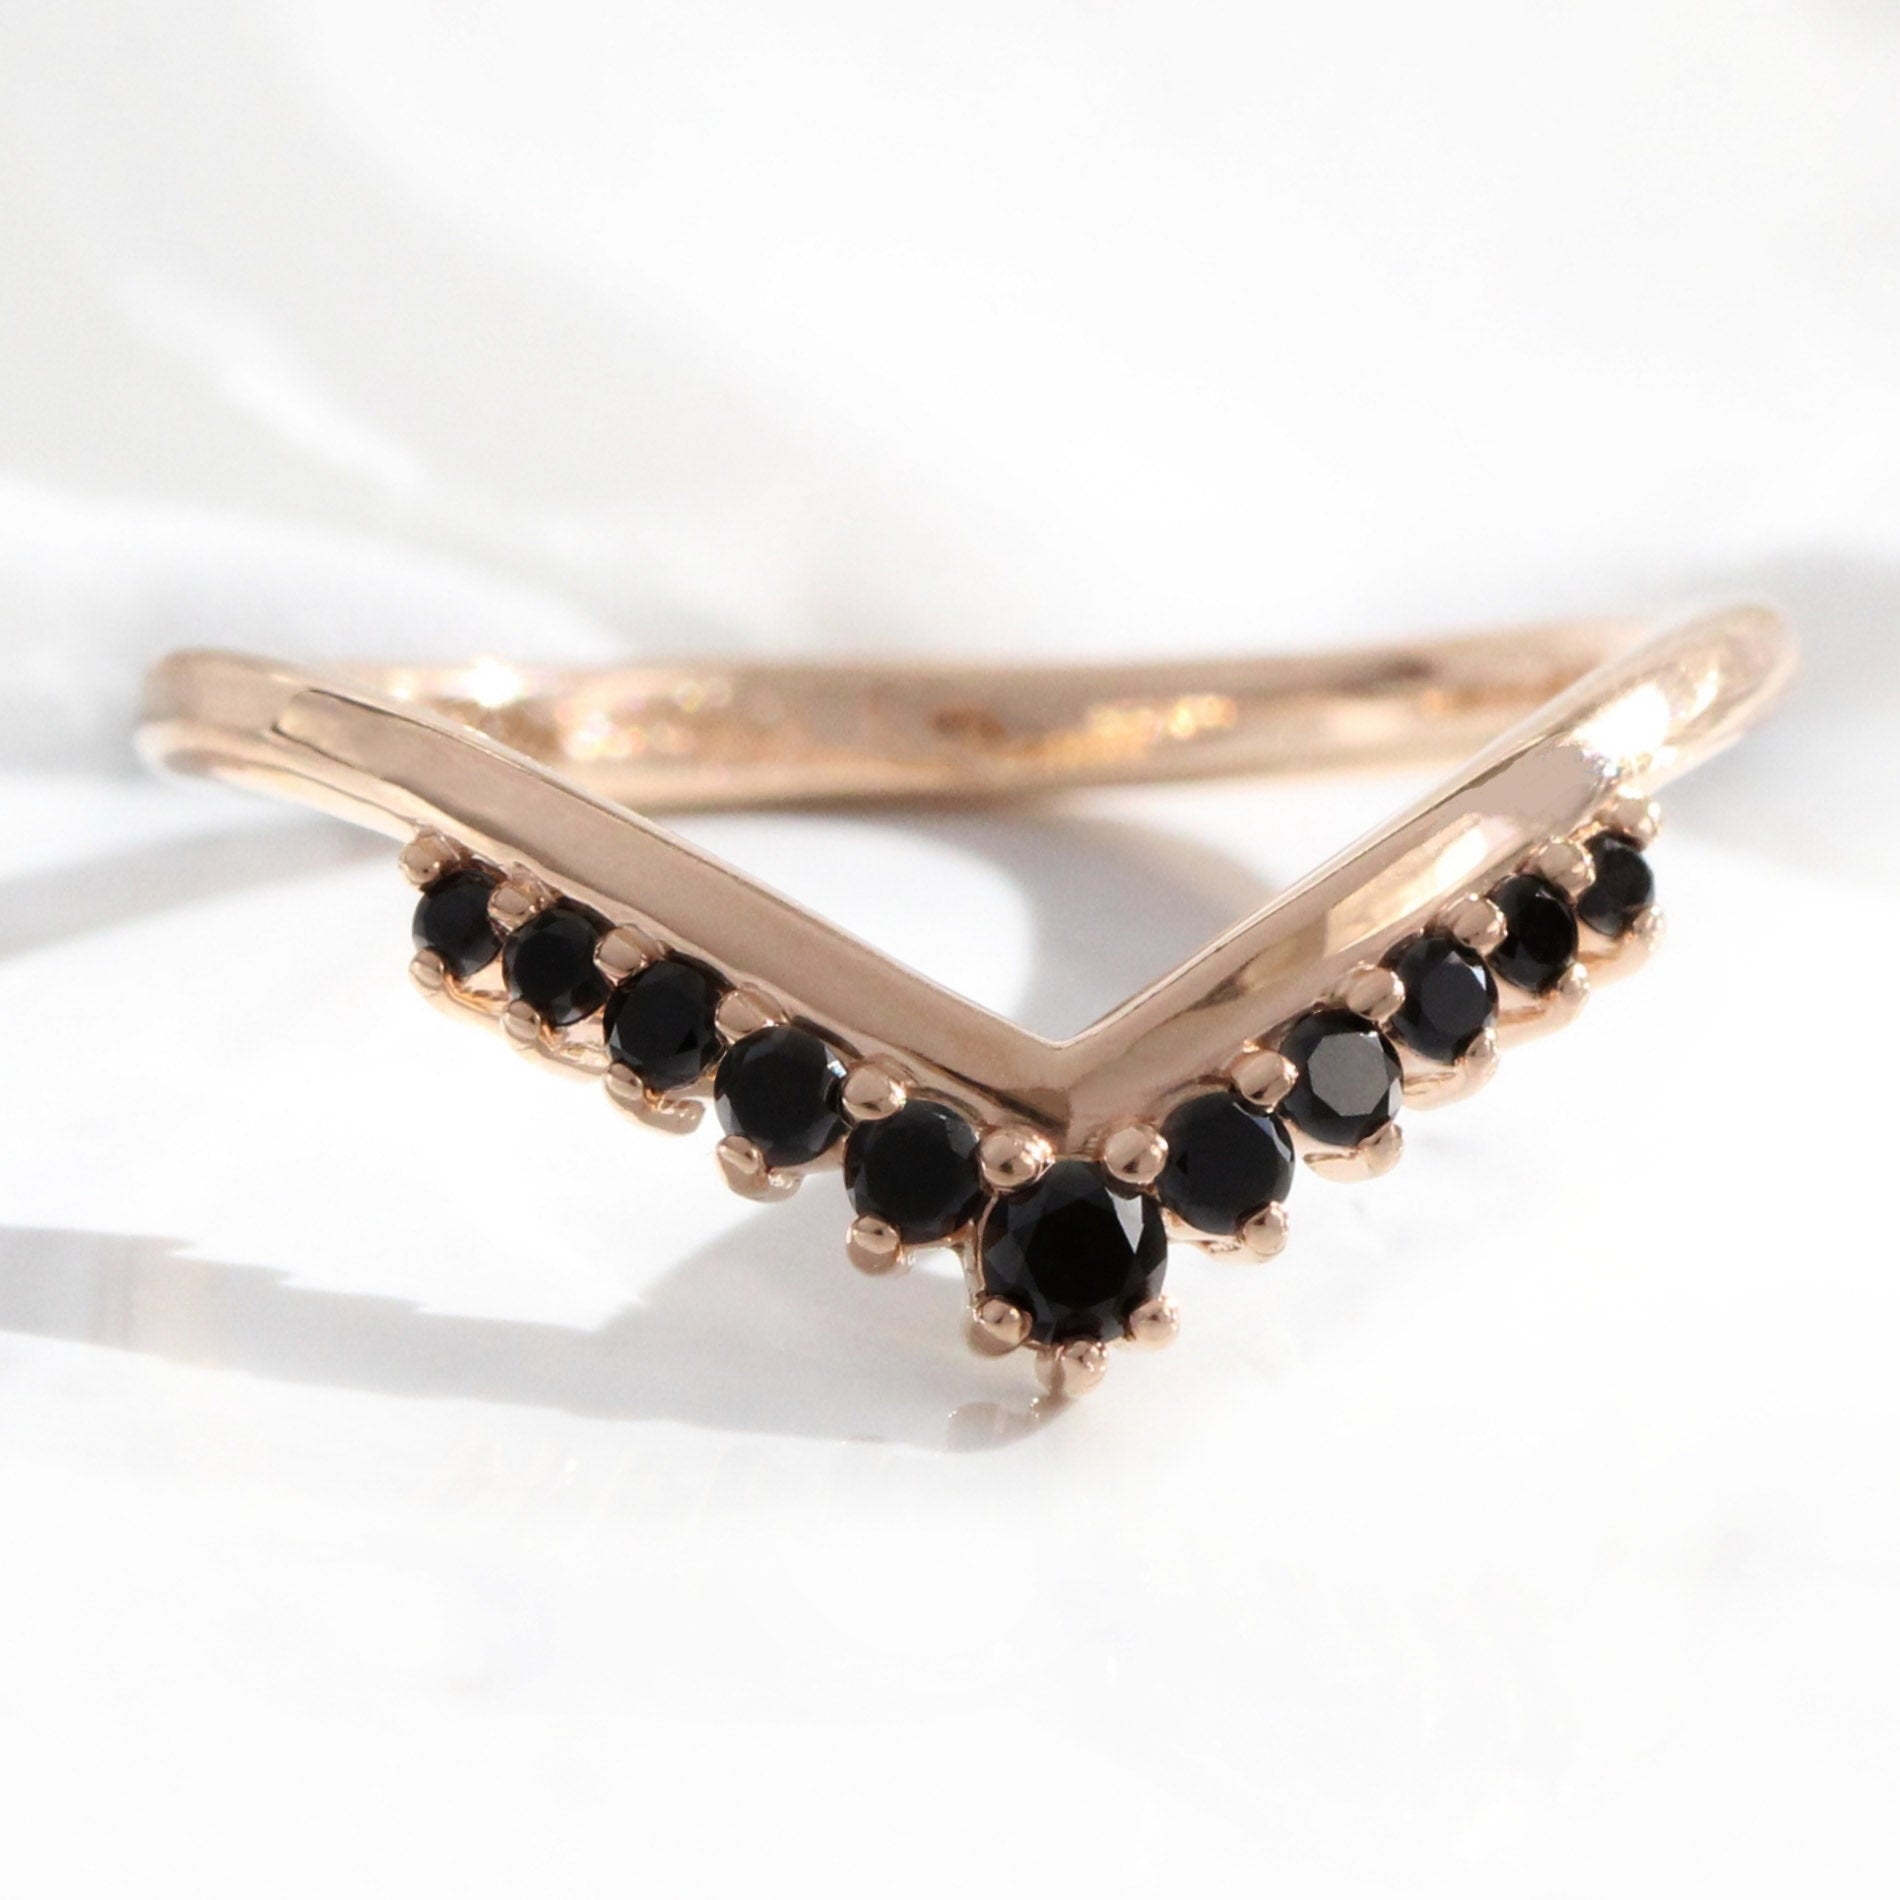 Tiara black diamond wedding ring rose gold curved V shaped band by la more design jewelry